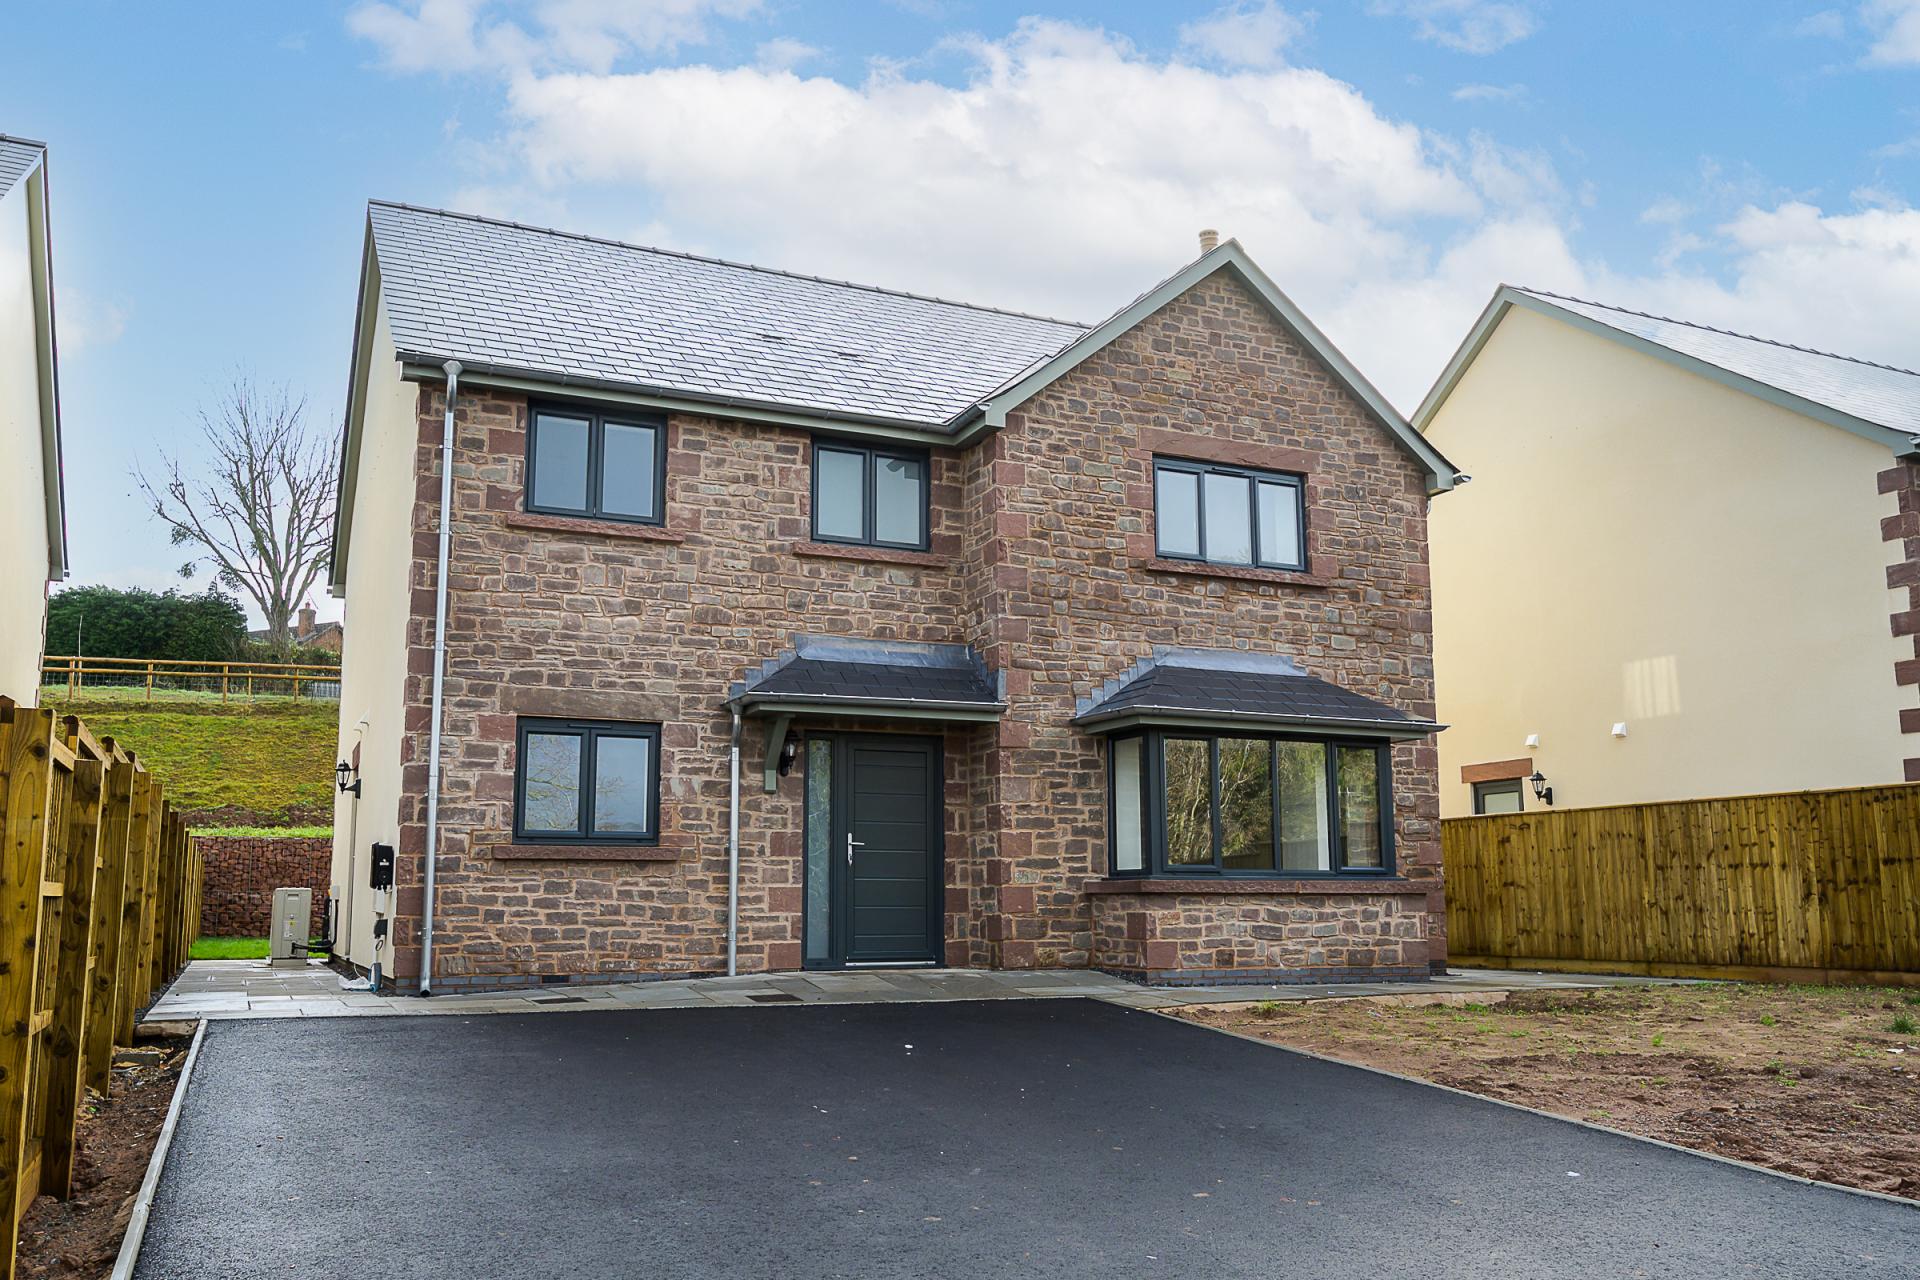 Ross on Wye, Herefordshire, 4 bedrooms - New Homes Blog